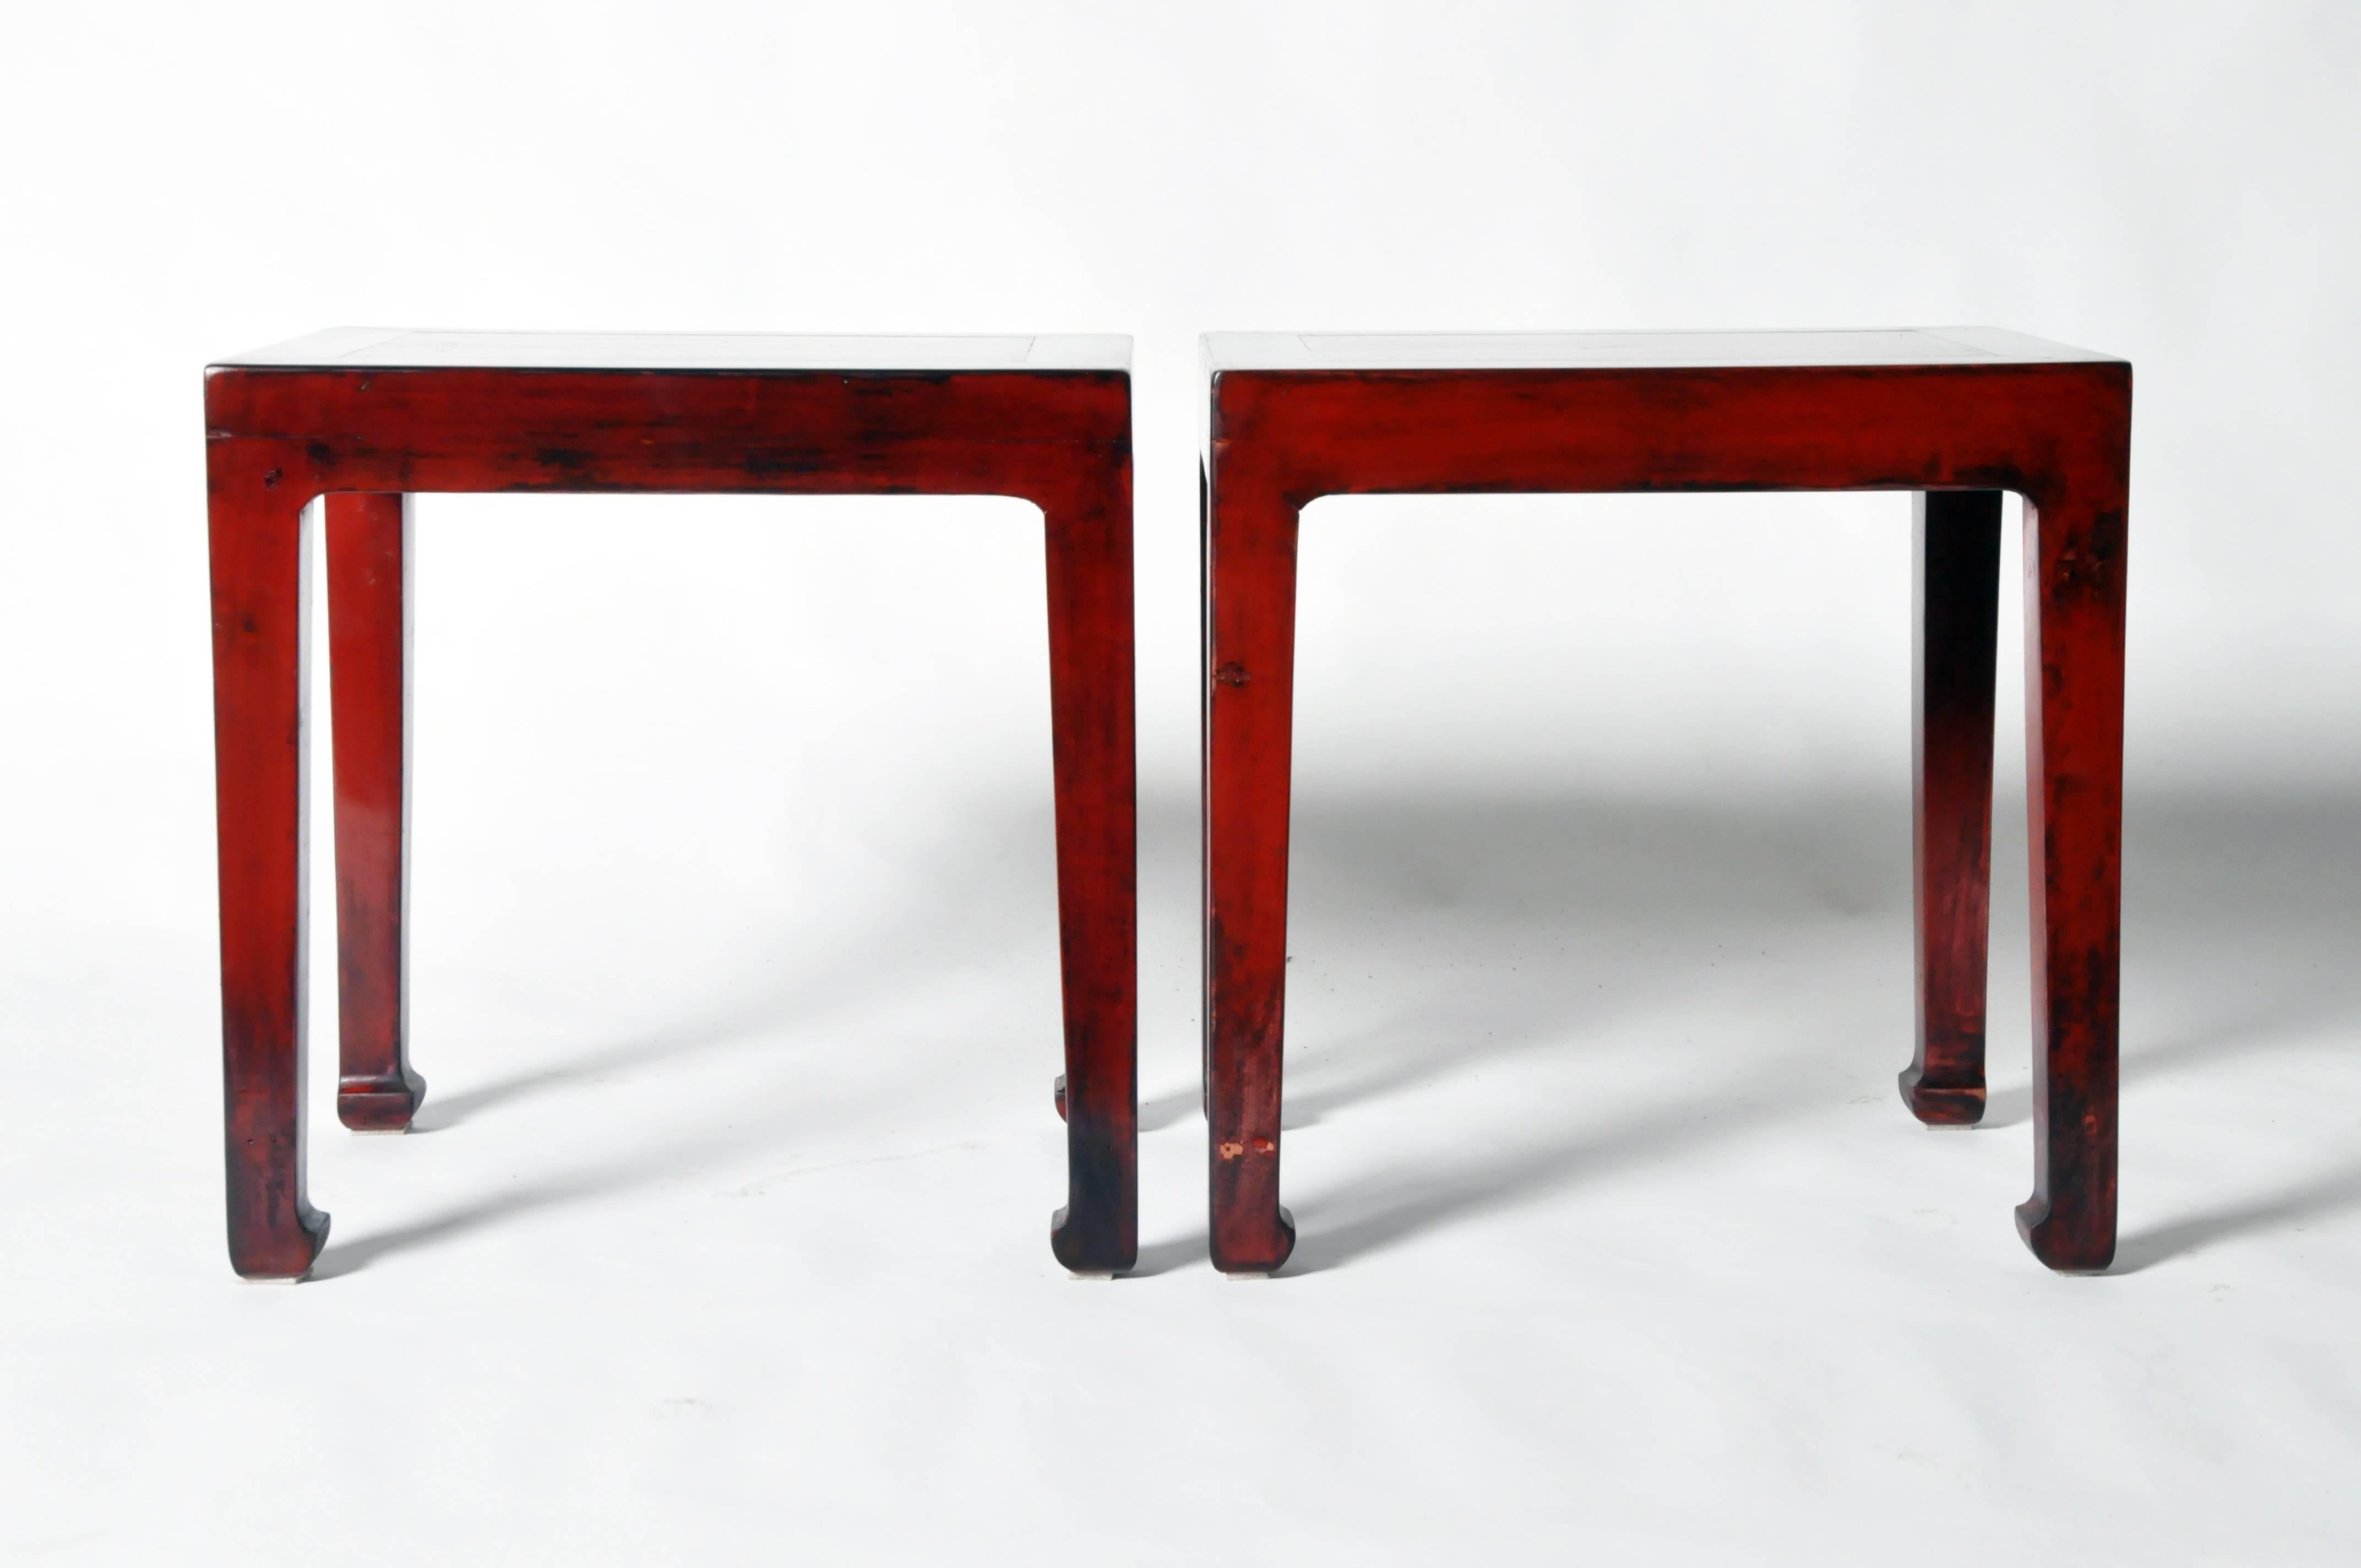 These Chinese side tables elmwood and has been fully restored. They also feature hoofed legs.